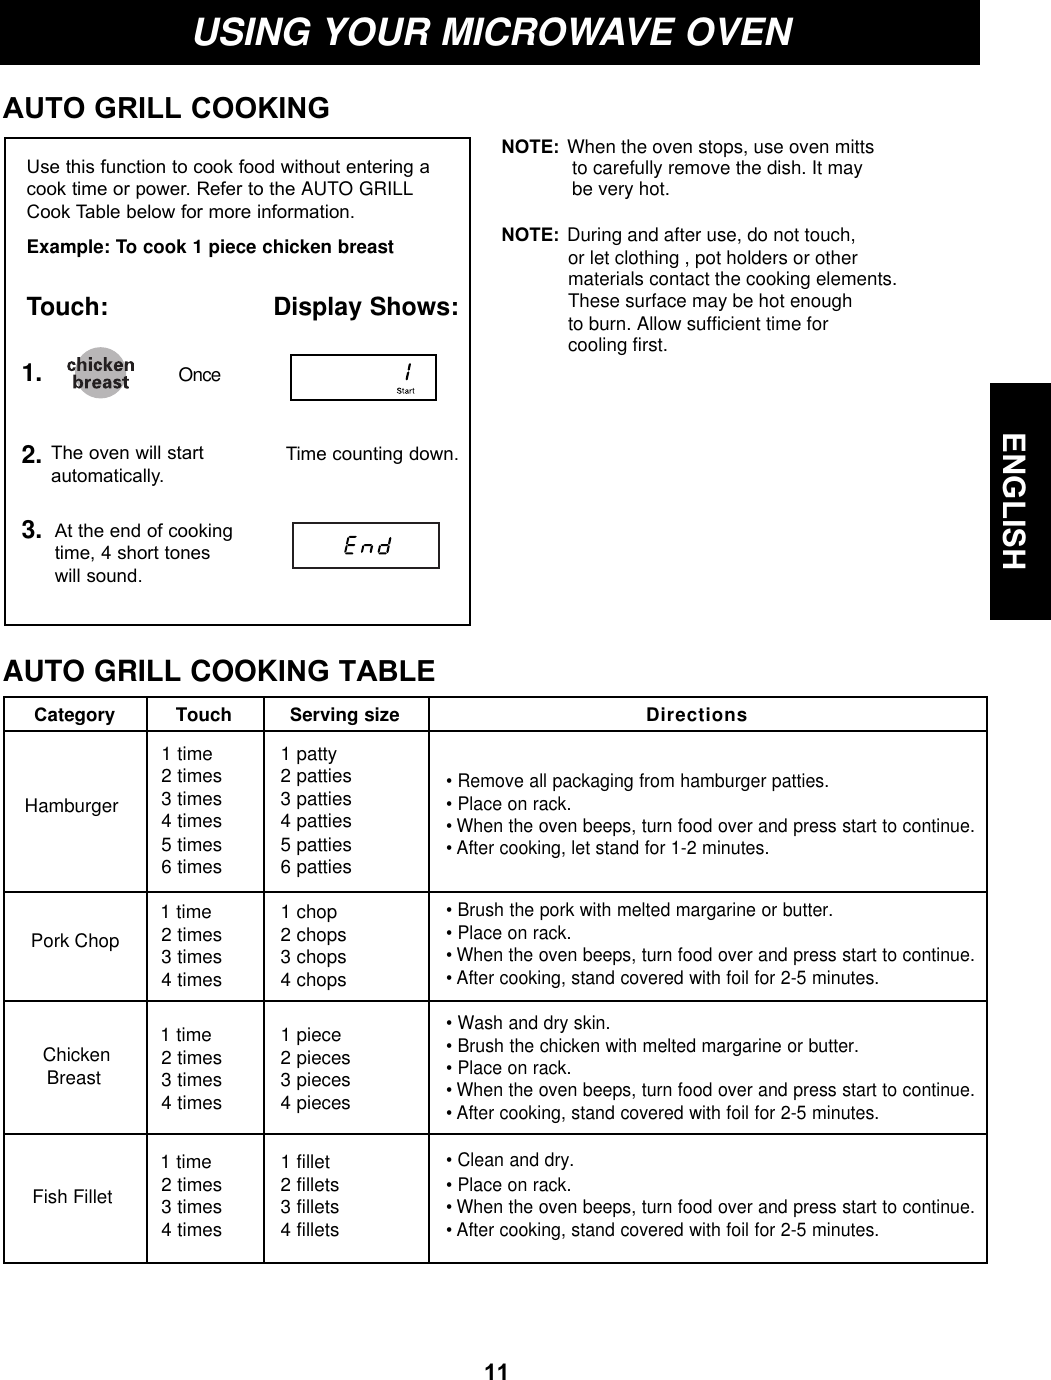 ENGLISH11USING YOUR MICROWAVE OVENAUTO GRILL COOKING Time counting down.The oven will startautomatically.At the end of cookingtime, 4 short tones will sound.Use this function to cook food without entering acook time or power. Refer to the AUTO GRILLCook Table below for more information.Example: To cook 1 piece chicken breastTouch: Display Shows:1.2.3.OnceCategoryAUTO GRILL COOKING TABLEHamburger1 time2 times3 times4 timesServing size1 patty2 patties3 patties4 pattiesDirections• Remove all packaging from hamburger patties.• Place on rack.• When the oven beeps, turn food over and press start to continue.Pork Chop 1 time2 times3 times4 times1 chop2 chops3 chops4 chops• Brush the pork with melted margarine or butter.• Place on rack.• When the oven beeps, turn food over and press start to continue.• After cooking, stand covered with foil for 2-5 minutes.Chicken 1 time2 times3 times4 times1 piece2 pieces3 pieces4 pieces• Brush the chicken with melted margarine or butter.• Place on rack.• When the oven beeps, turn food over and press start to continue.• After cooking, stand covered with foil for 2-5 minutes.Breast• Wash and dry skin.1 time2 times3 times4 times1 fillet2 fillets3 fillets4 fillets• Place on rack.• When the oven beeps, turn food over and press start to continue.• After cooking, stand covered with foil for 2-5 minutes.Fish Fillet • Clean and dry.• After cooking, let stand for 1-2 minutes.TouchNOTE:  When the oven stops, use oven mittsto carefully remove the dish. It may NOTE:  During and after use, do not touch, materials contact the cooking elements.These surface may be hot enoughto burn. Allow sufficient time forbe very hot.or let clothing , pot holders or othercooling first.5 times6 times 5 patties6 patties